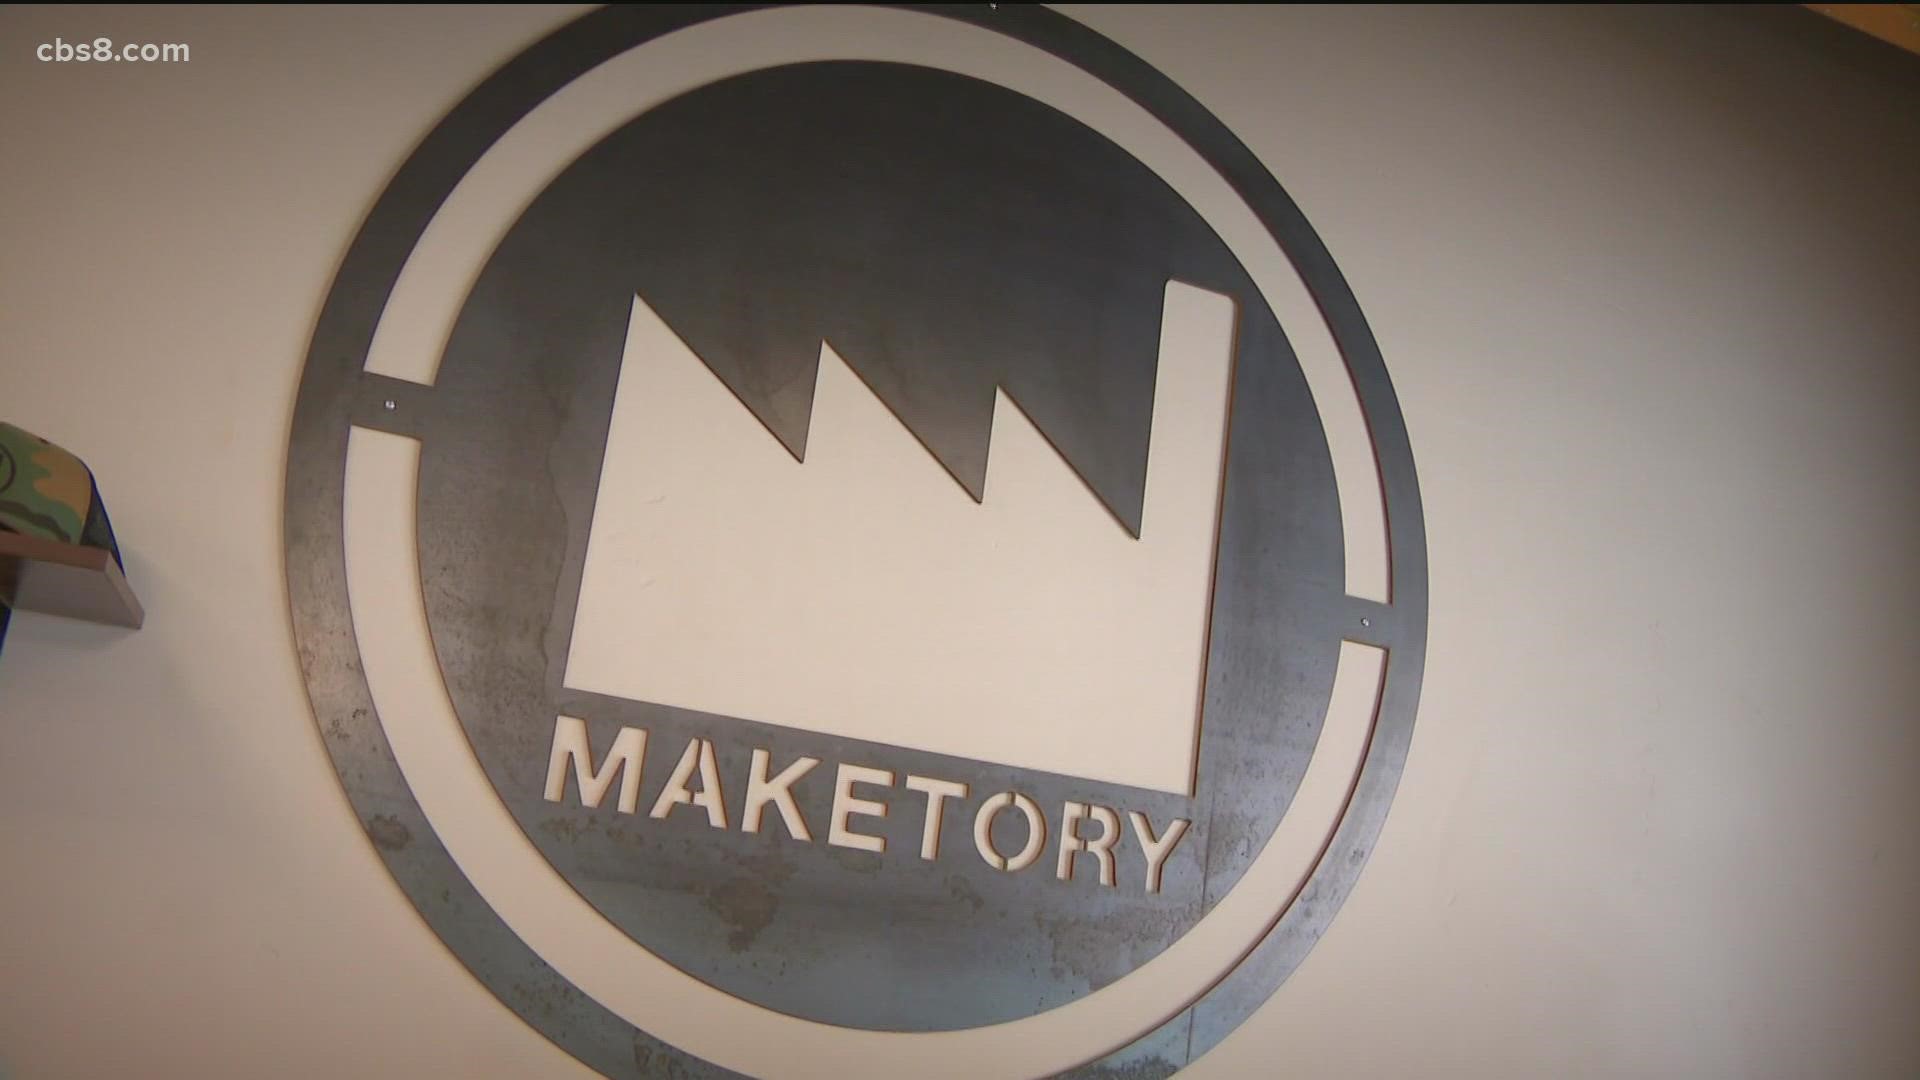 Jenny went to Maketory to see what they are all about and how they are helping small businesses owners have success across the county.